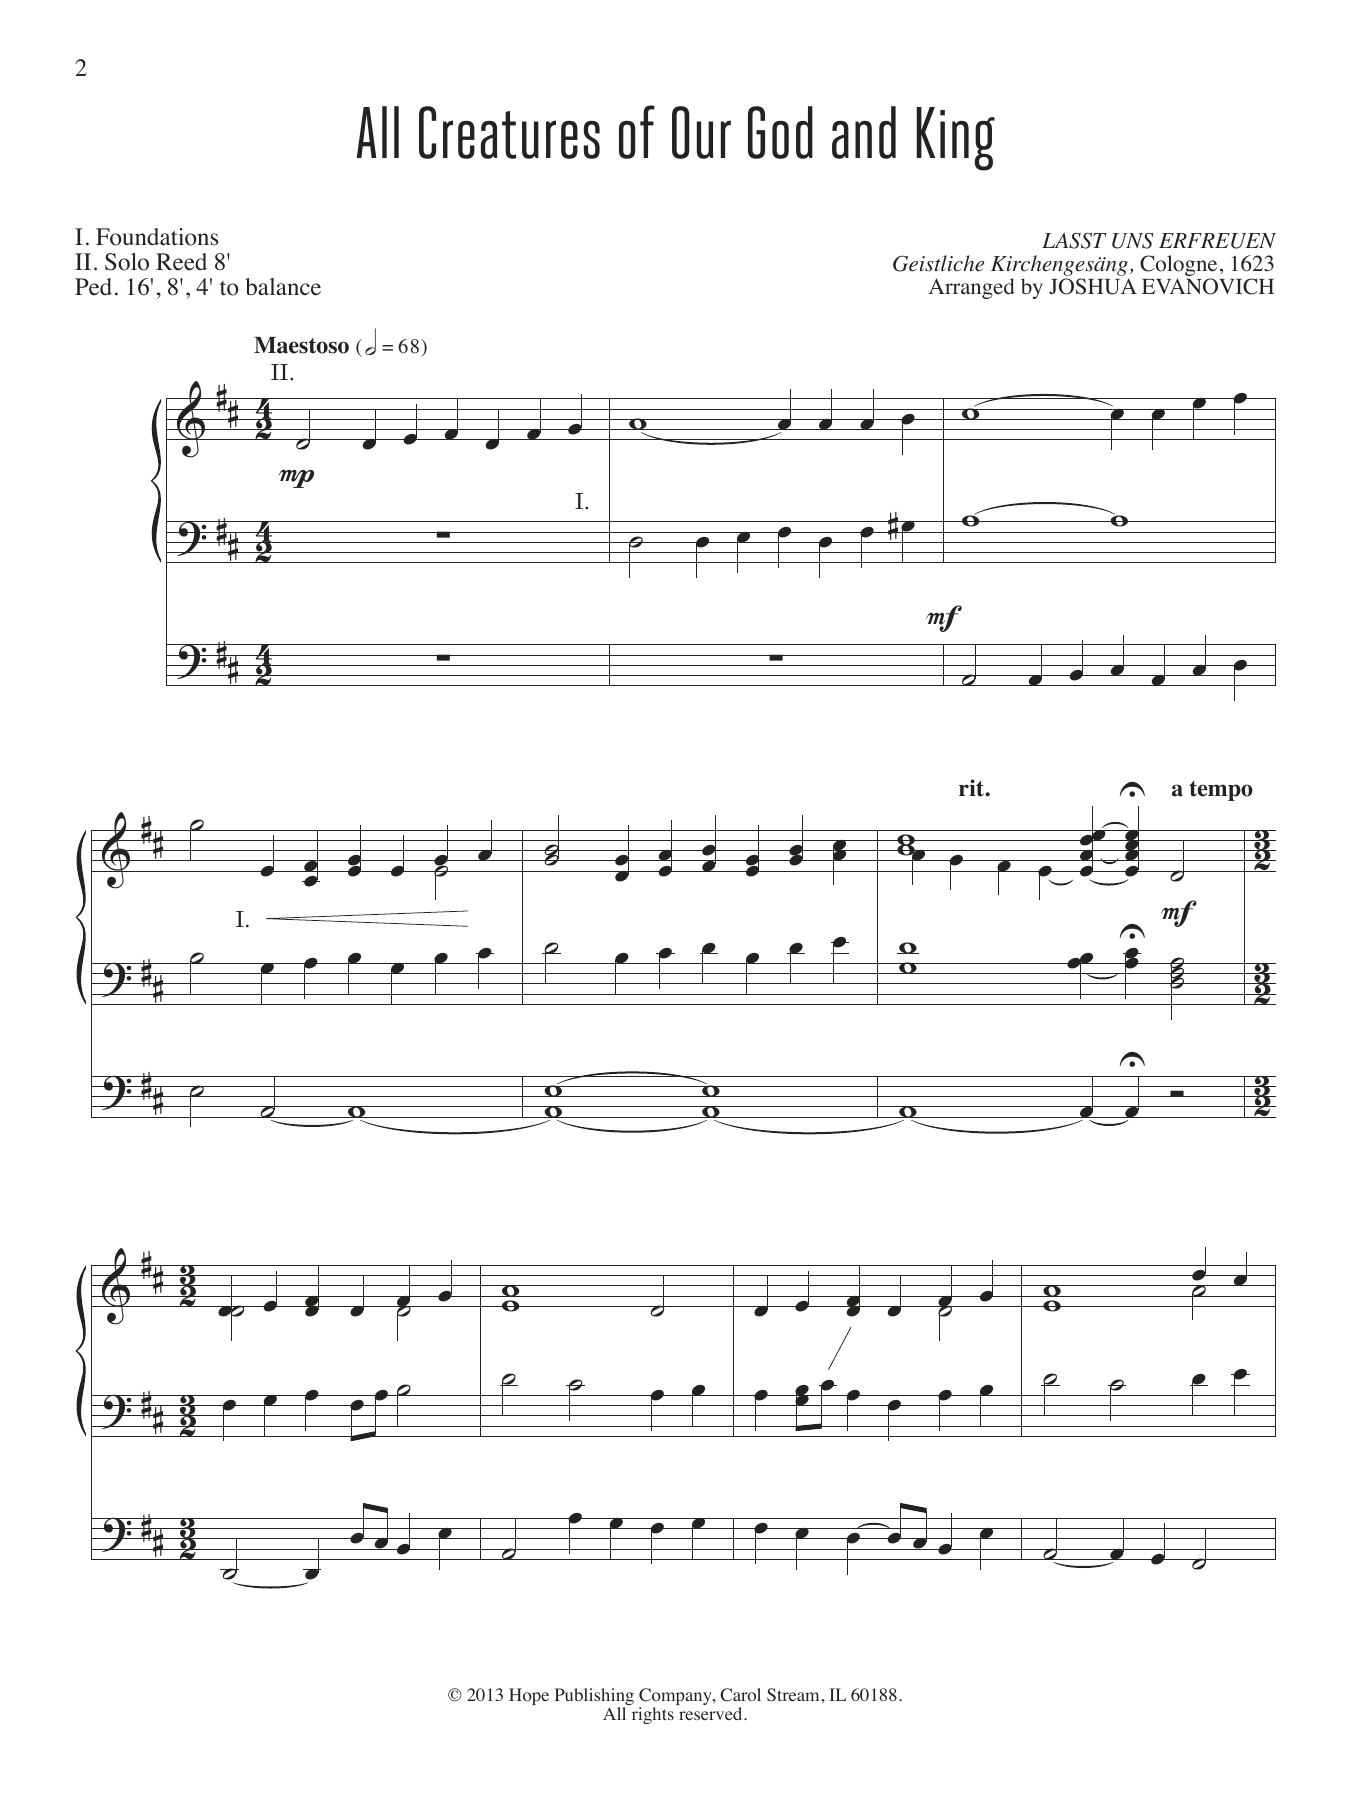 Download Joshua Evanovich All Creatures of Our God And King Sheet Music